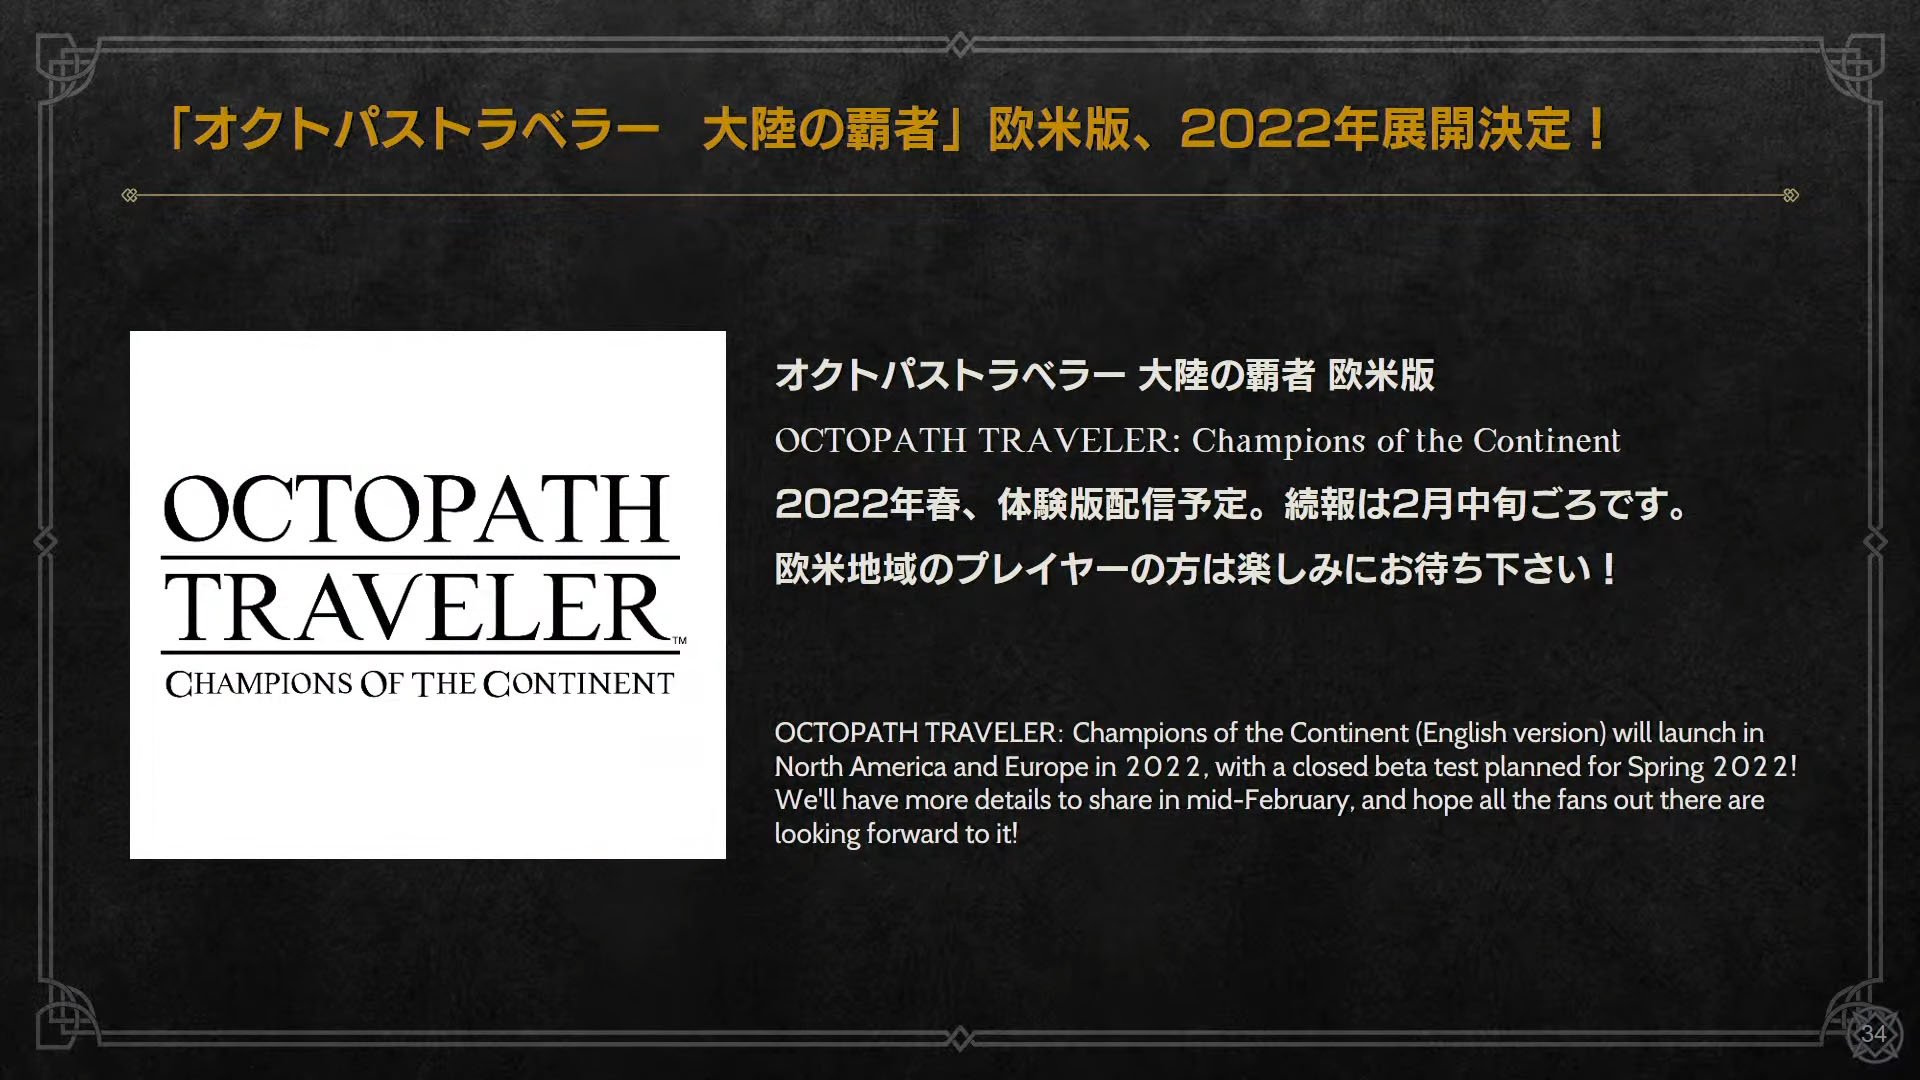 Octopath Traveler: Champions of the Continent Closed Beta has